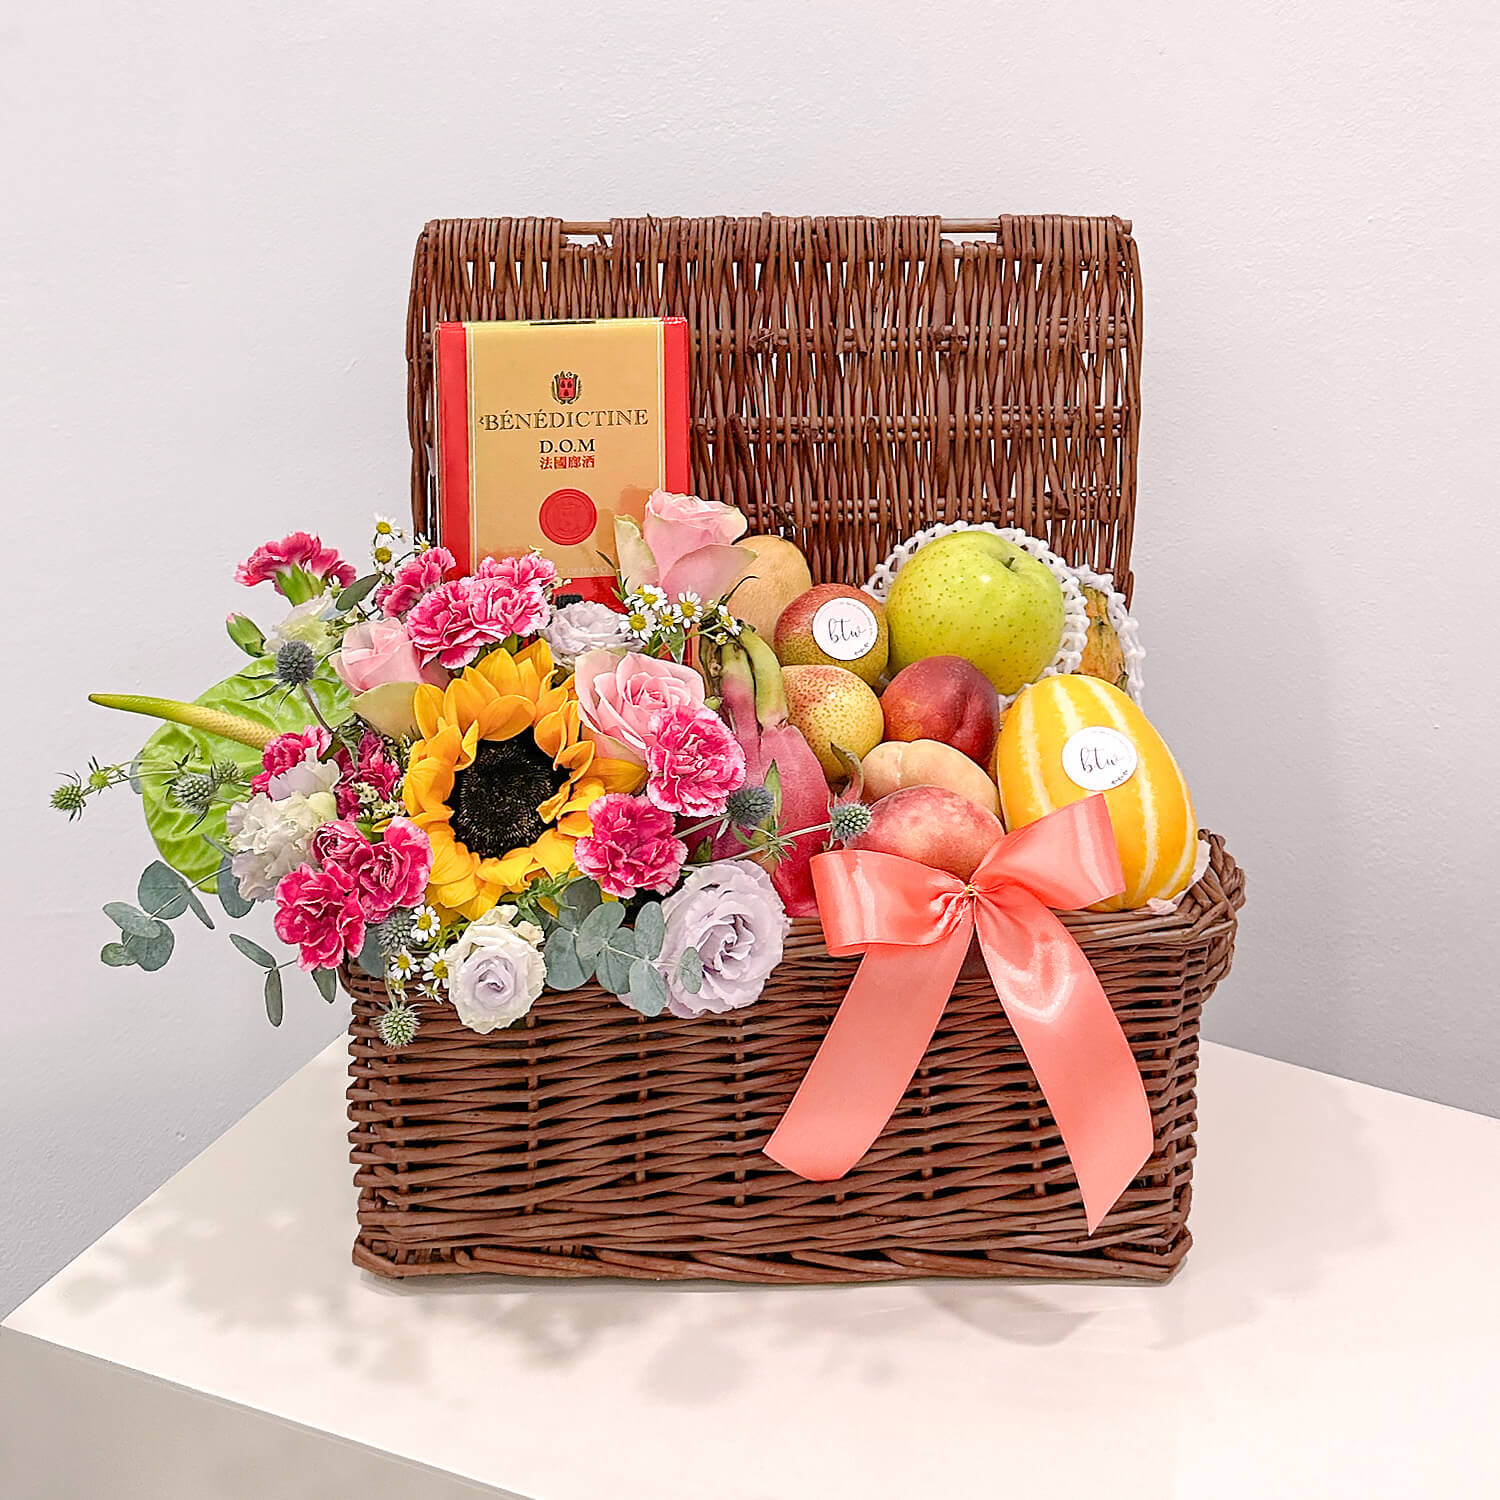 Blossom Vitality Hamper (with Dom)